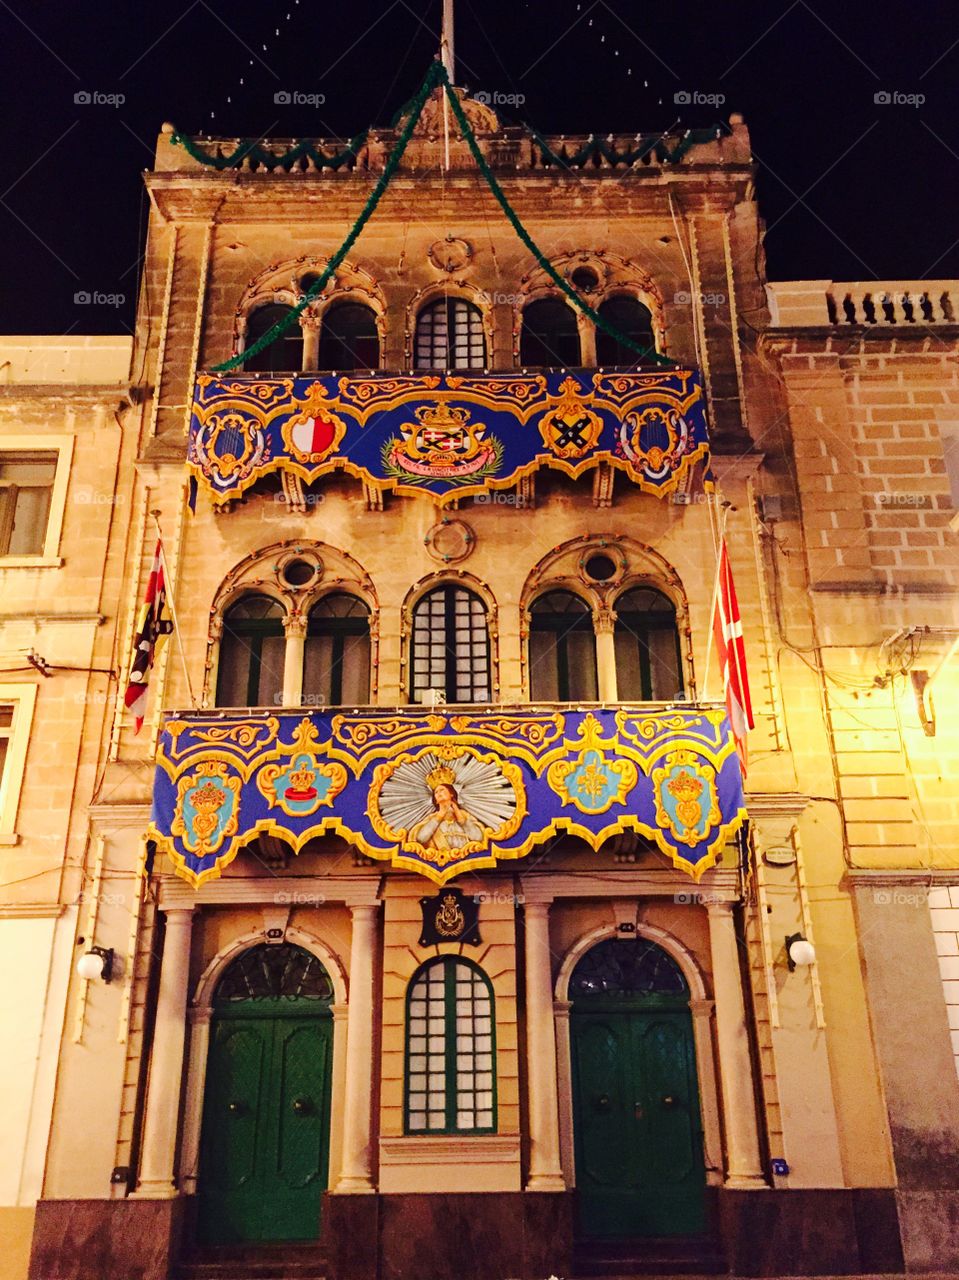 Windows around the world . A decorated house with ornate windows during the feast in L-Isla (Senglea) - in of the Three Cities, Malta.